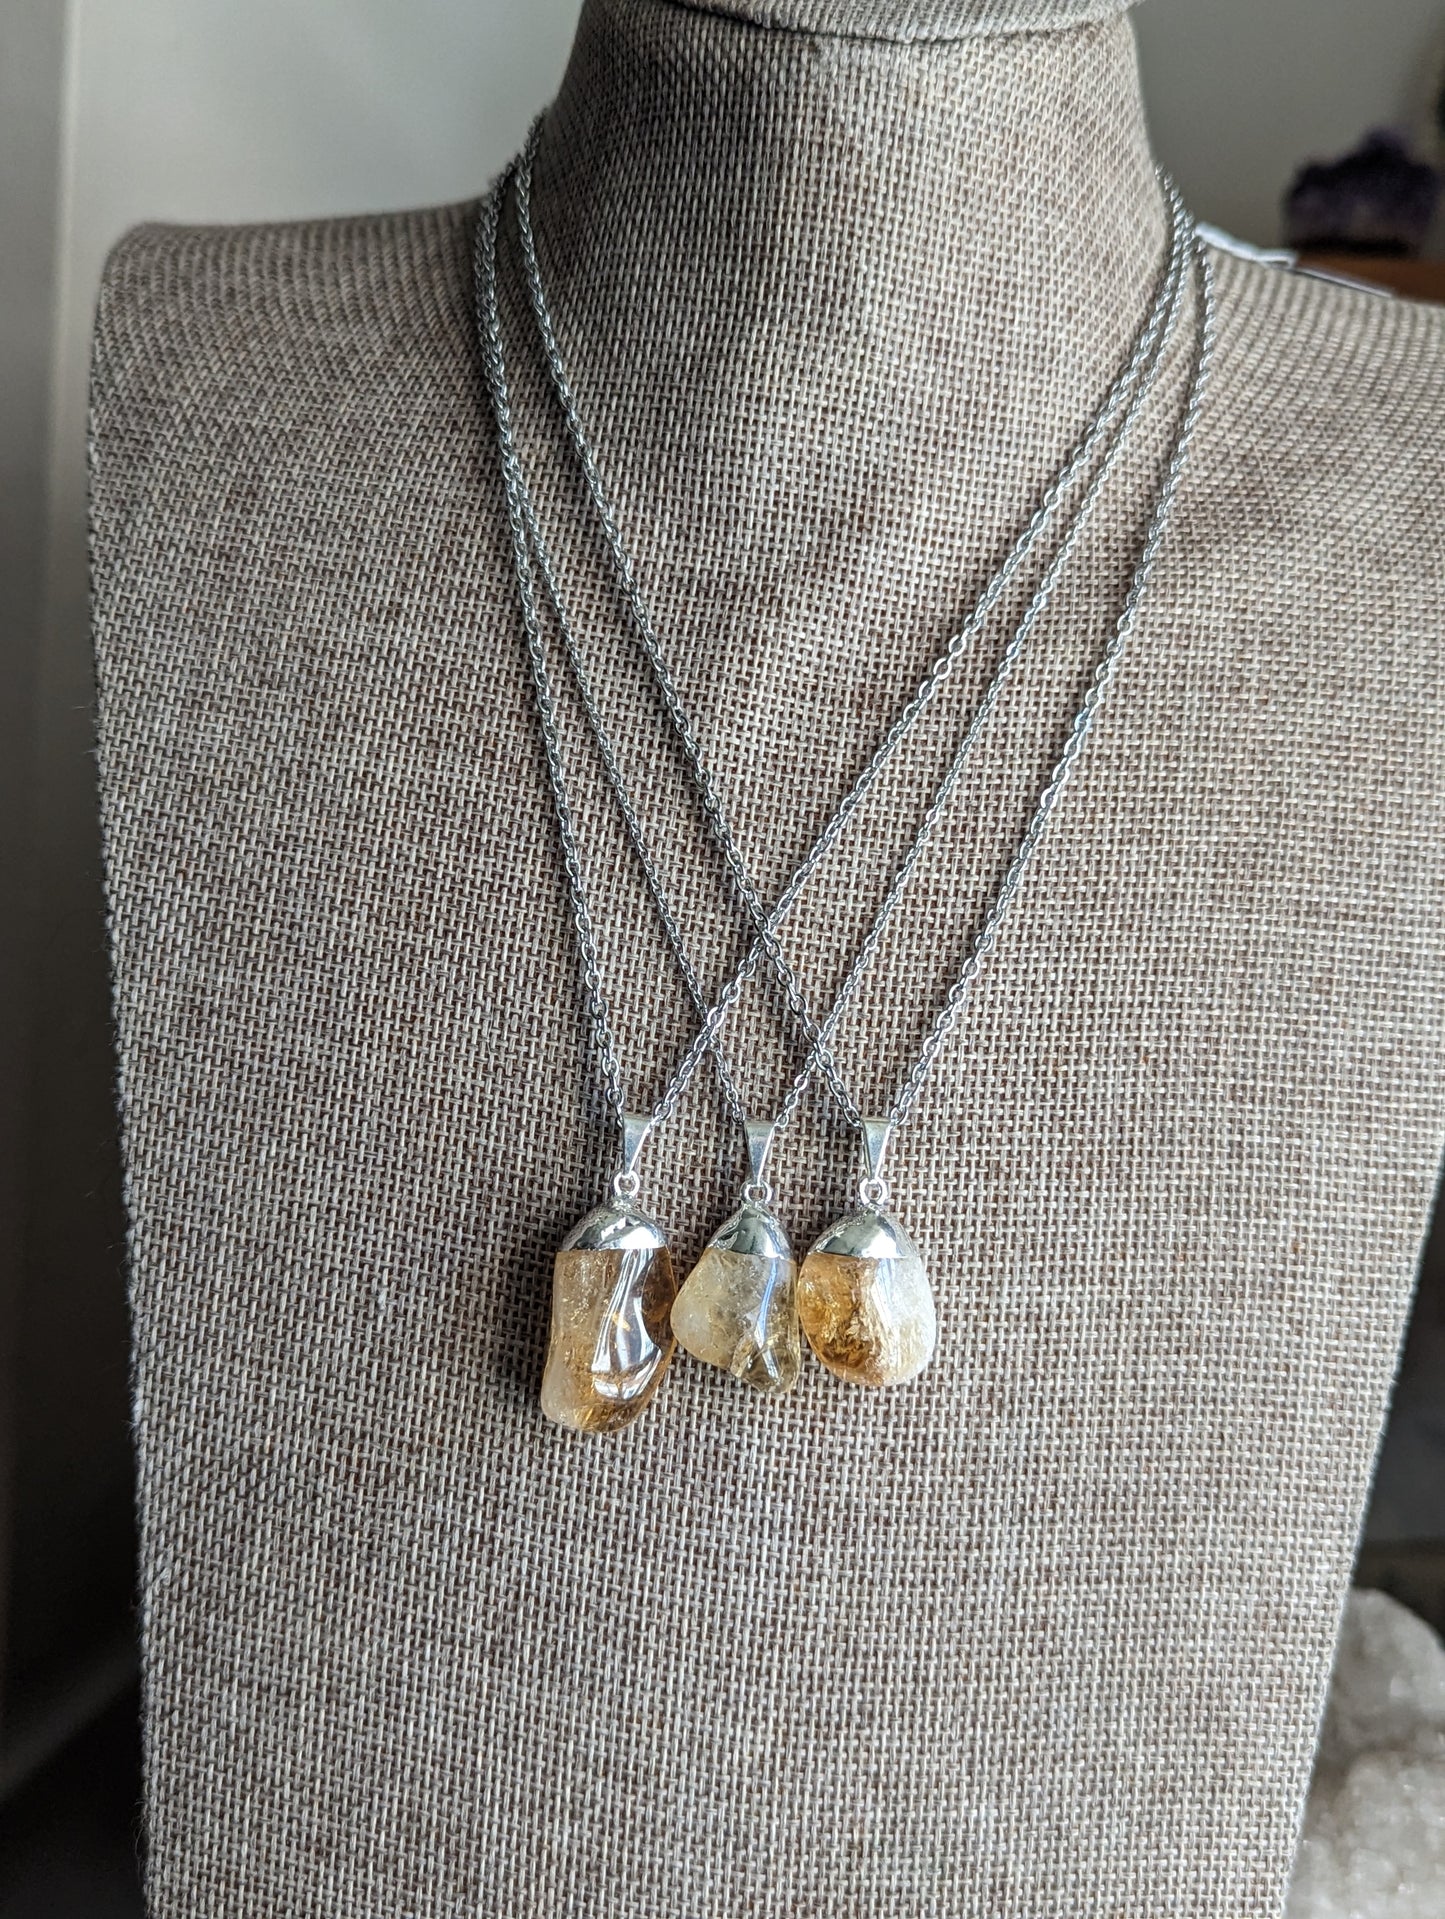 Citrine Pendant on Stainless Chain